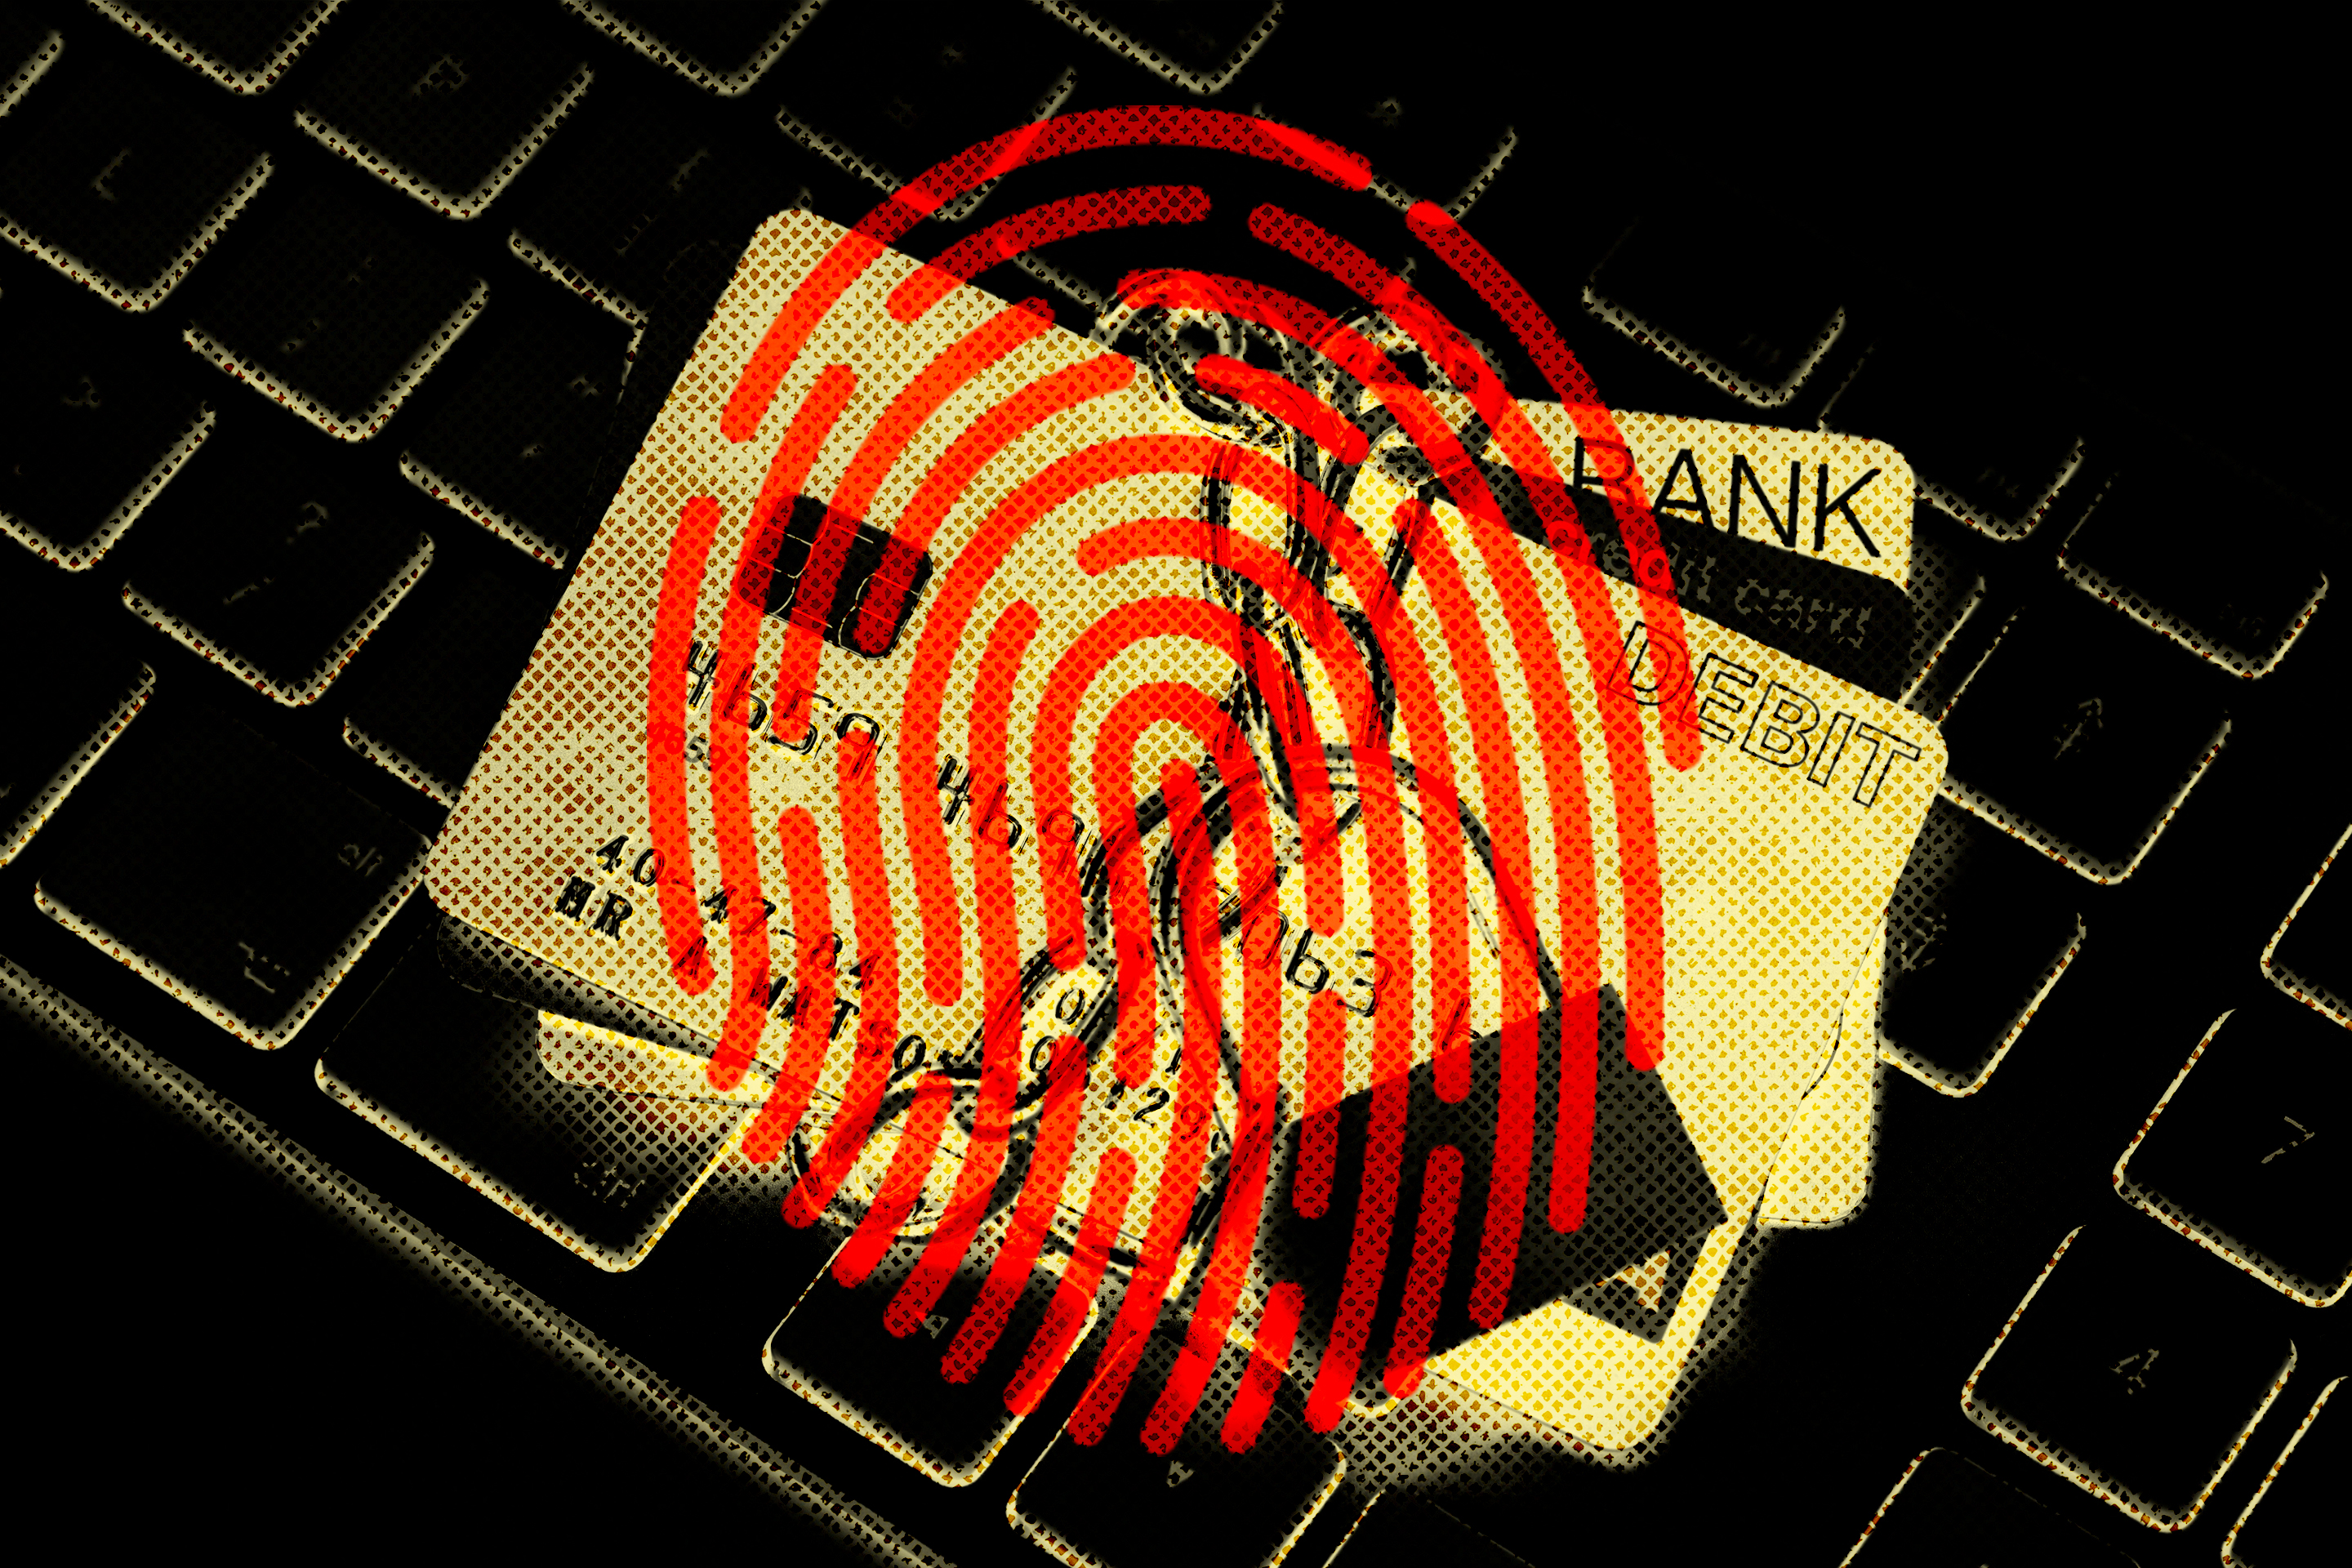 How to Report Identity Theft to Authorities